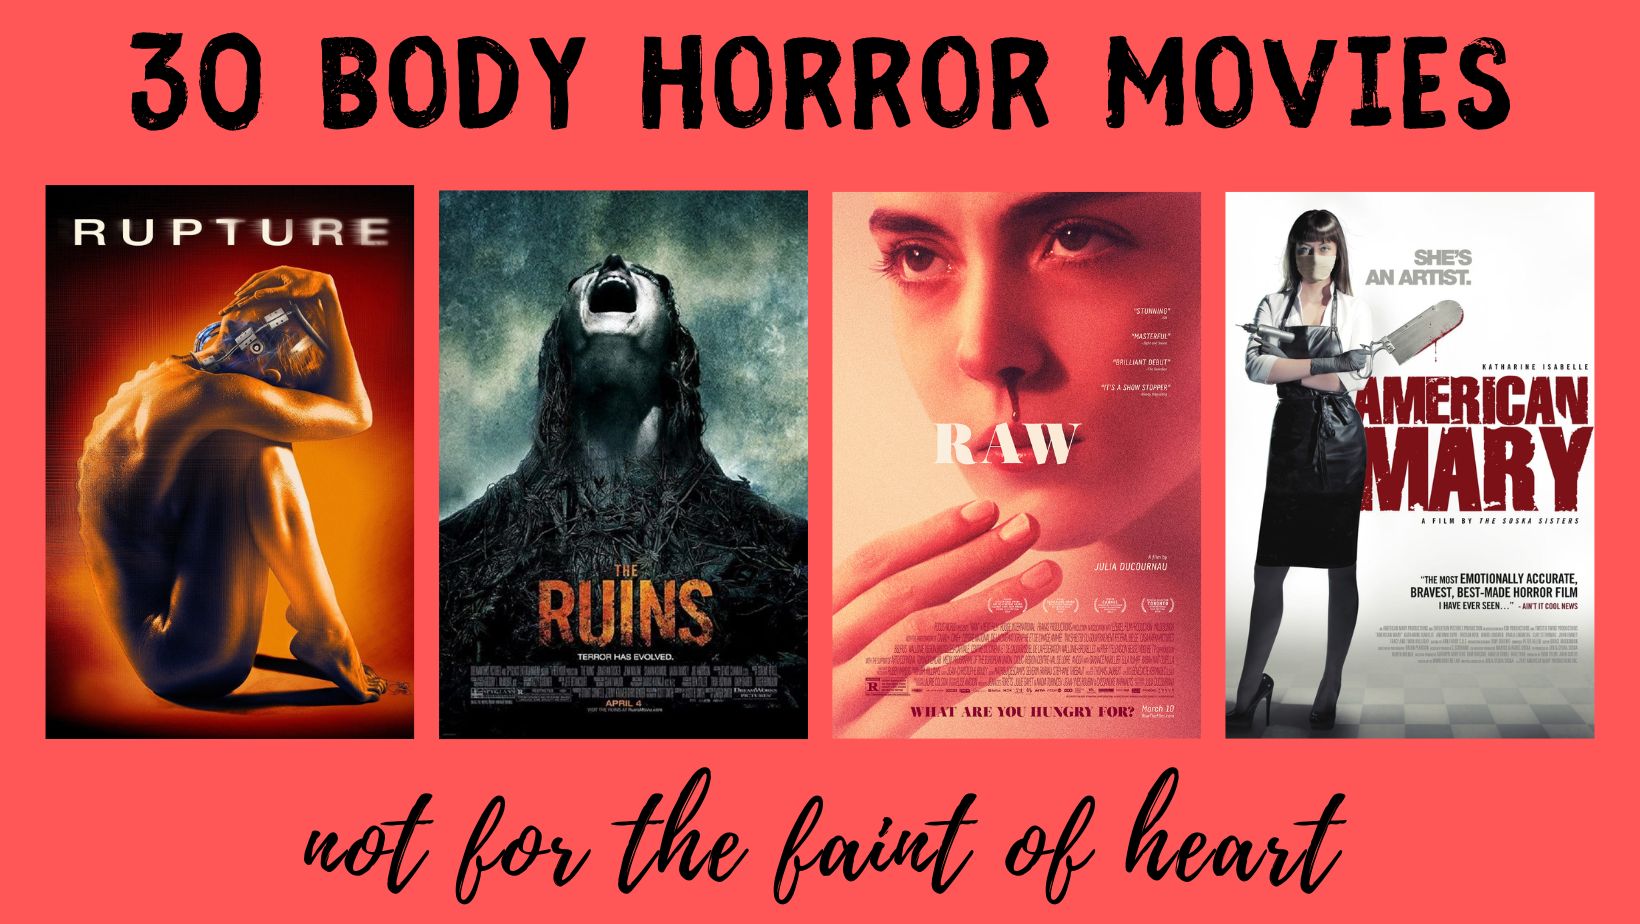 30 Body Horror Movies for Extreme Horror Fans